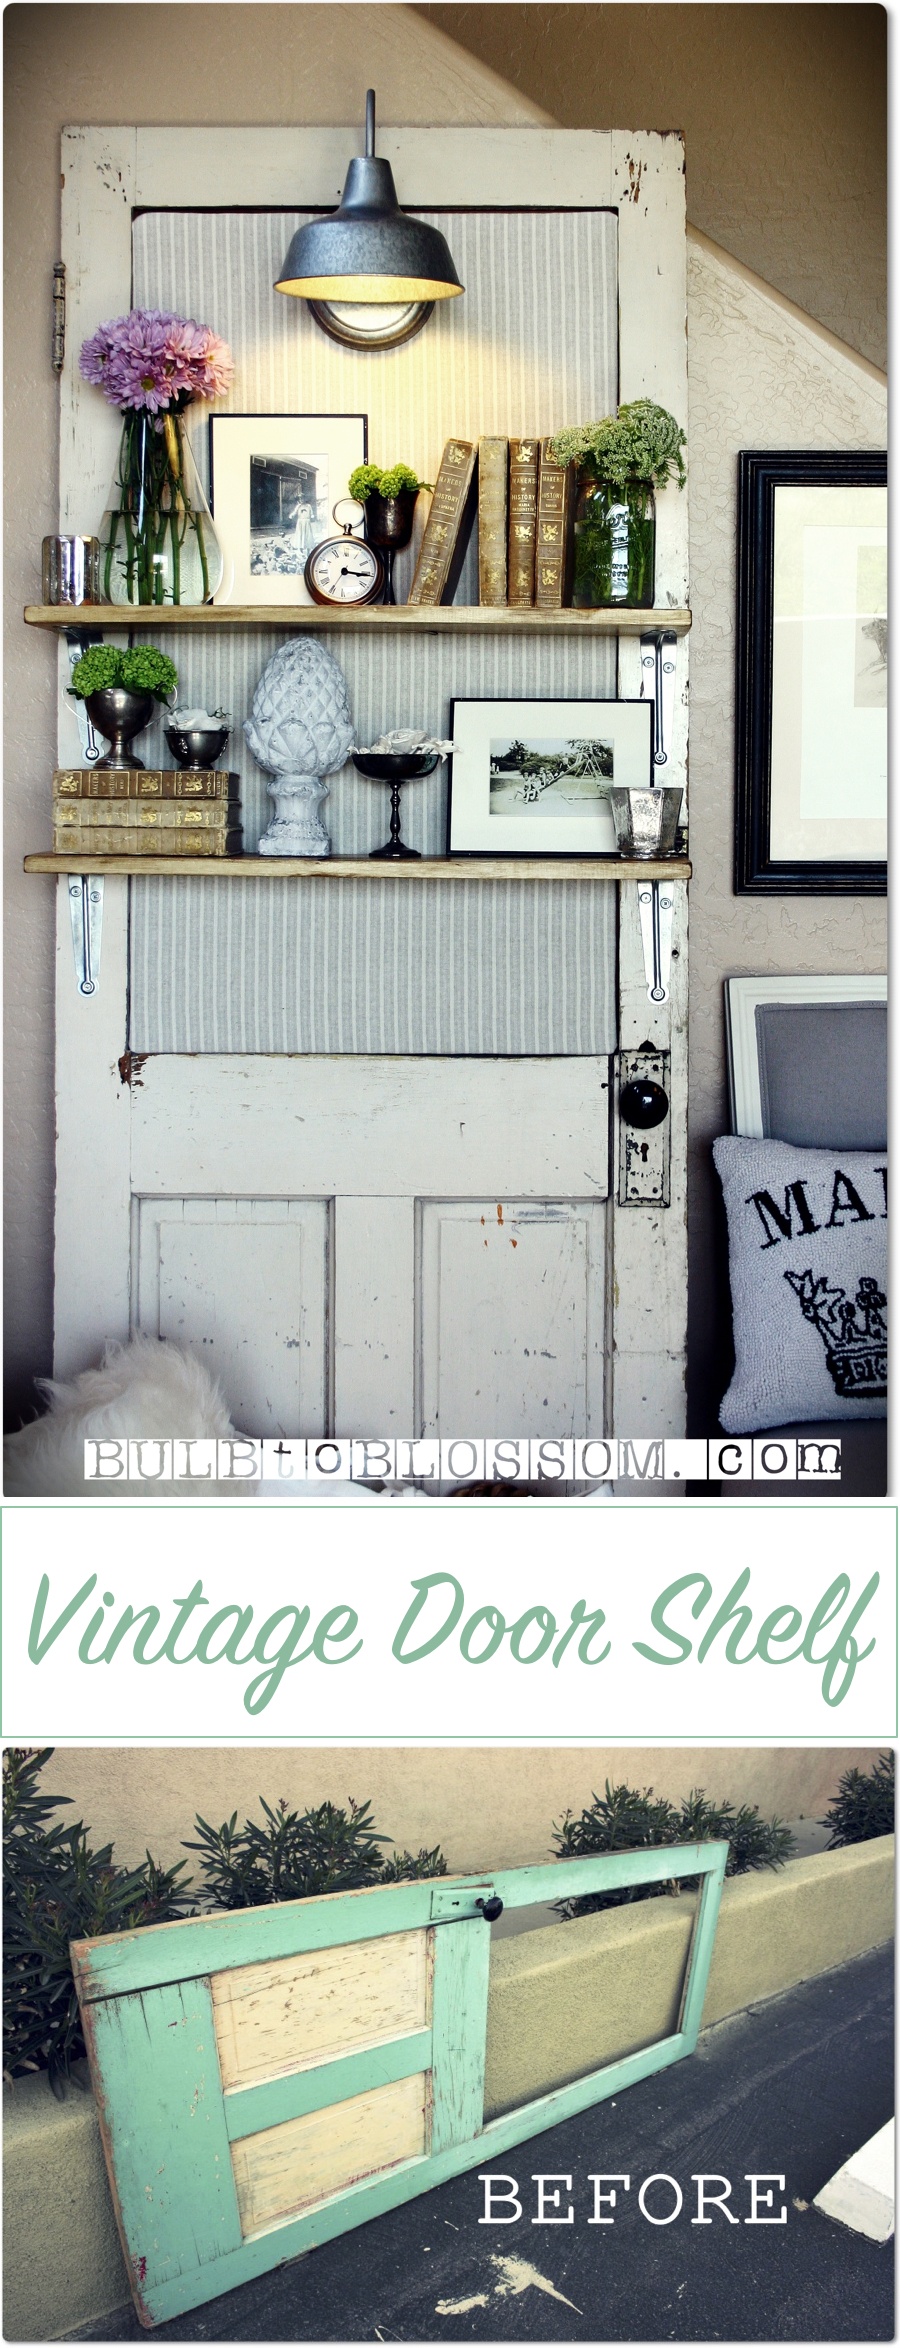 19 Creative Diy Project Ideas Of How To Reuse Old Doors Homelovr